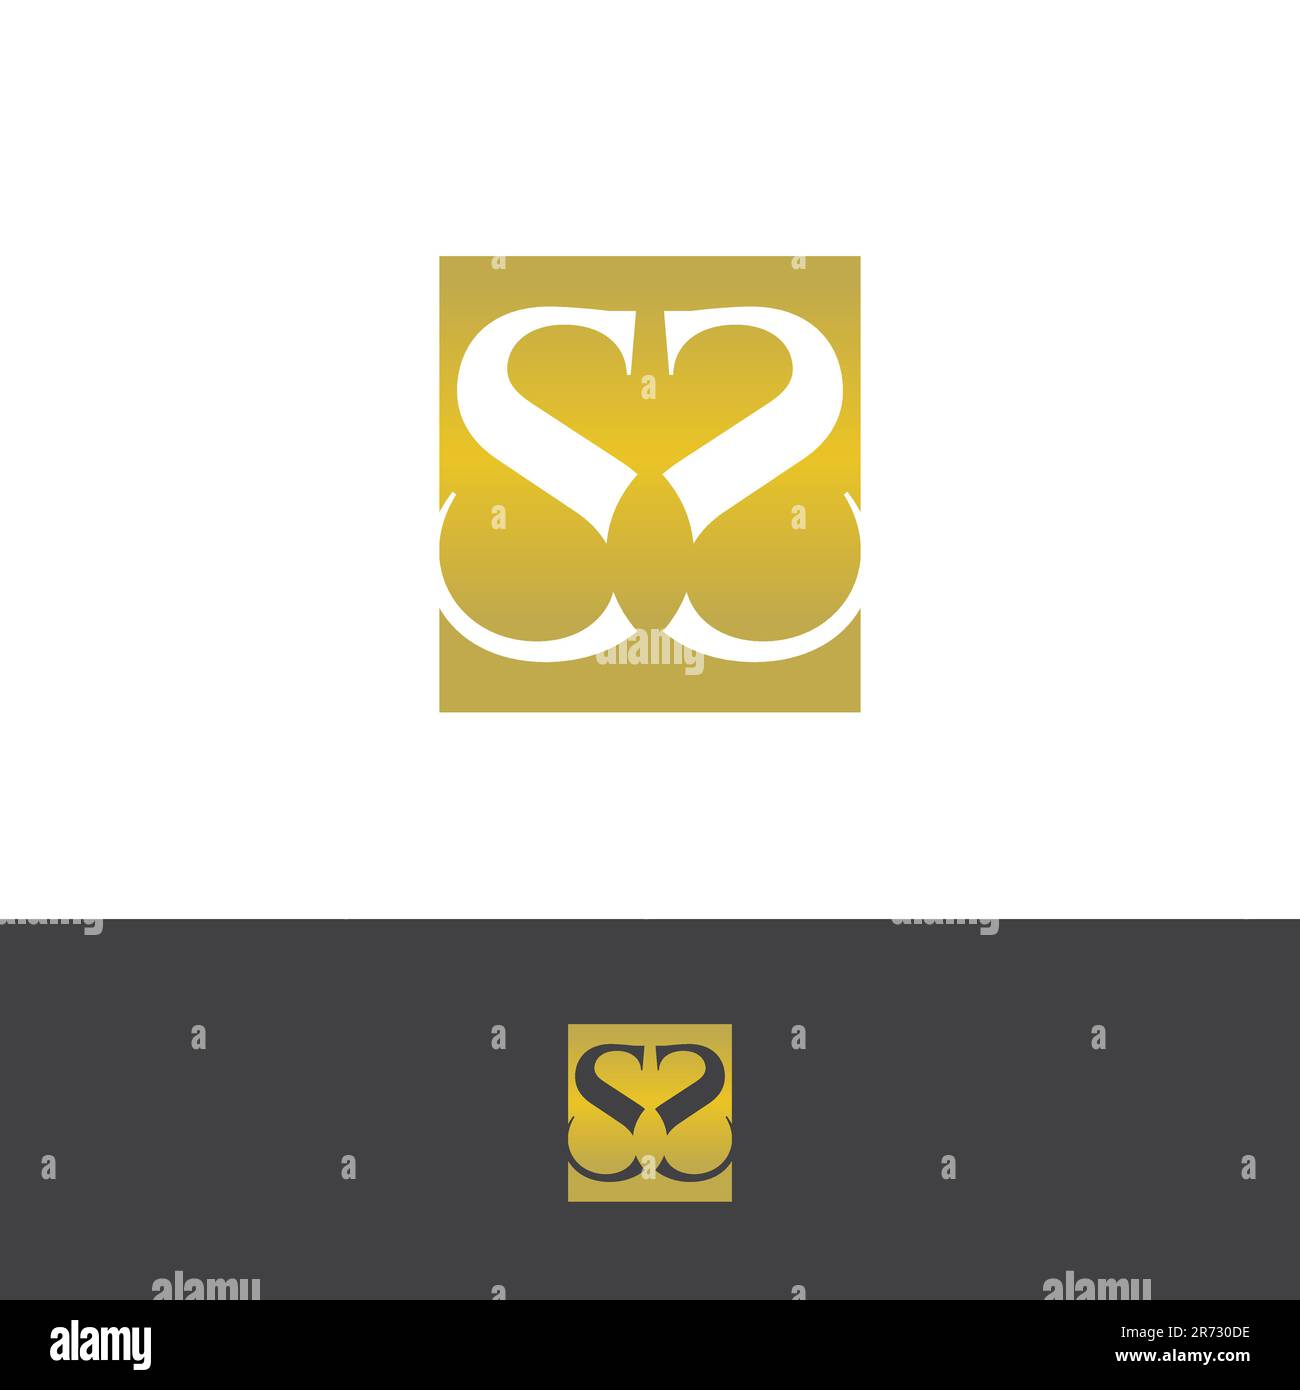 SS Beauty vector initial logo, logo of initial wedding, fashion, jewelry.EPS 10 Stock Vector